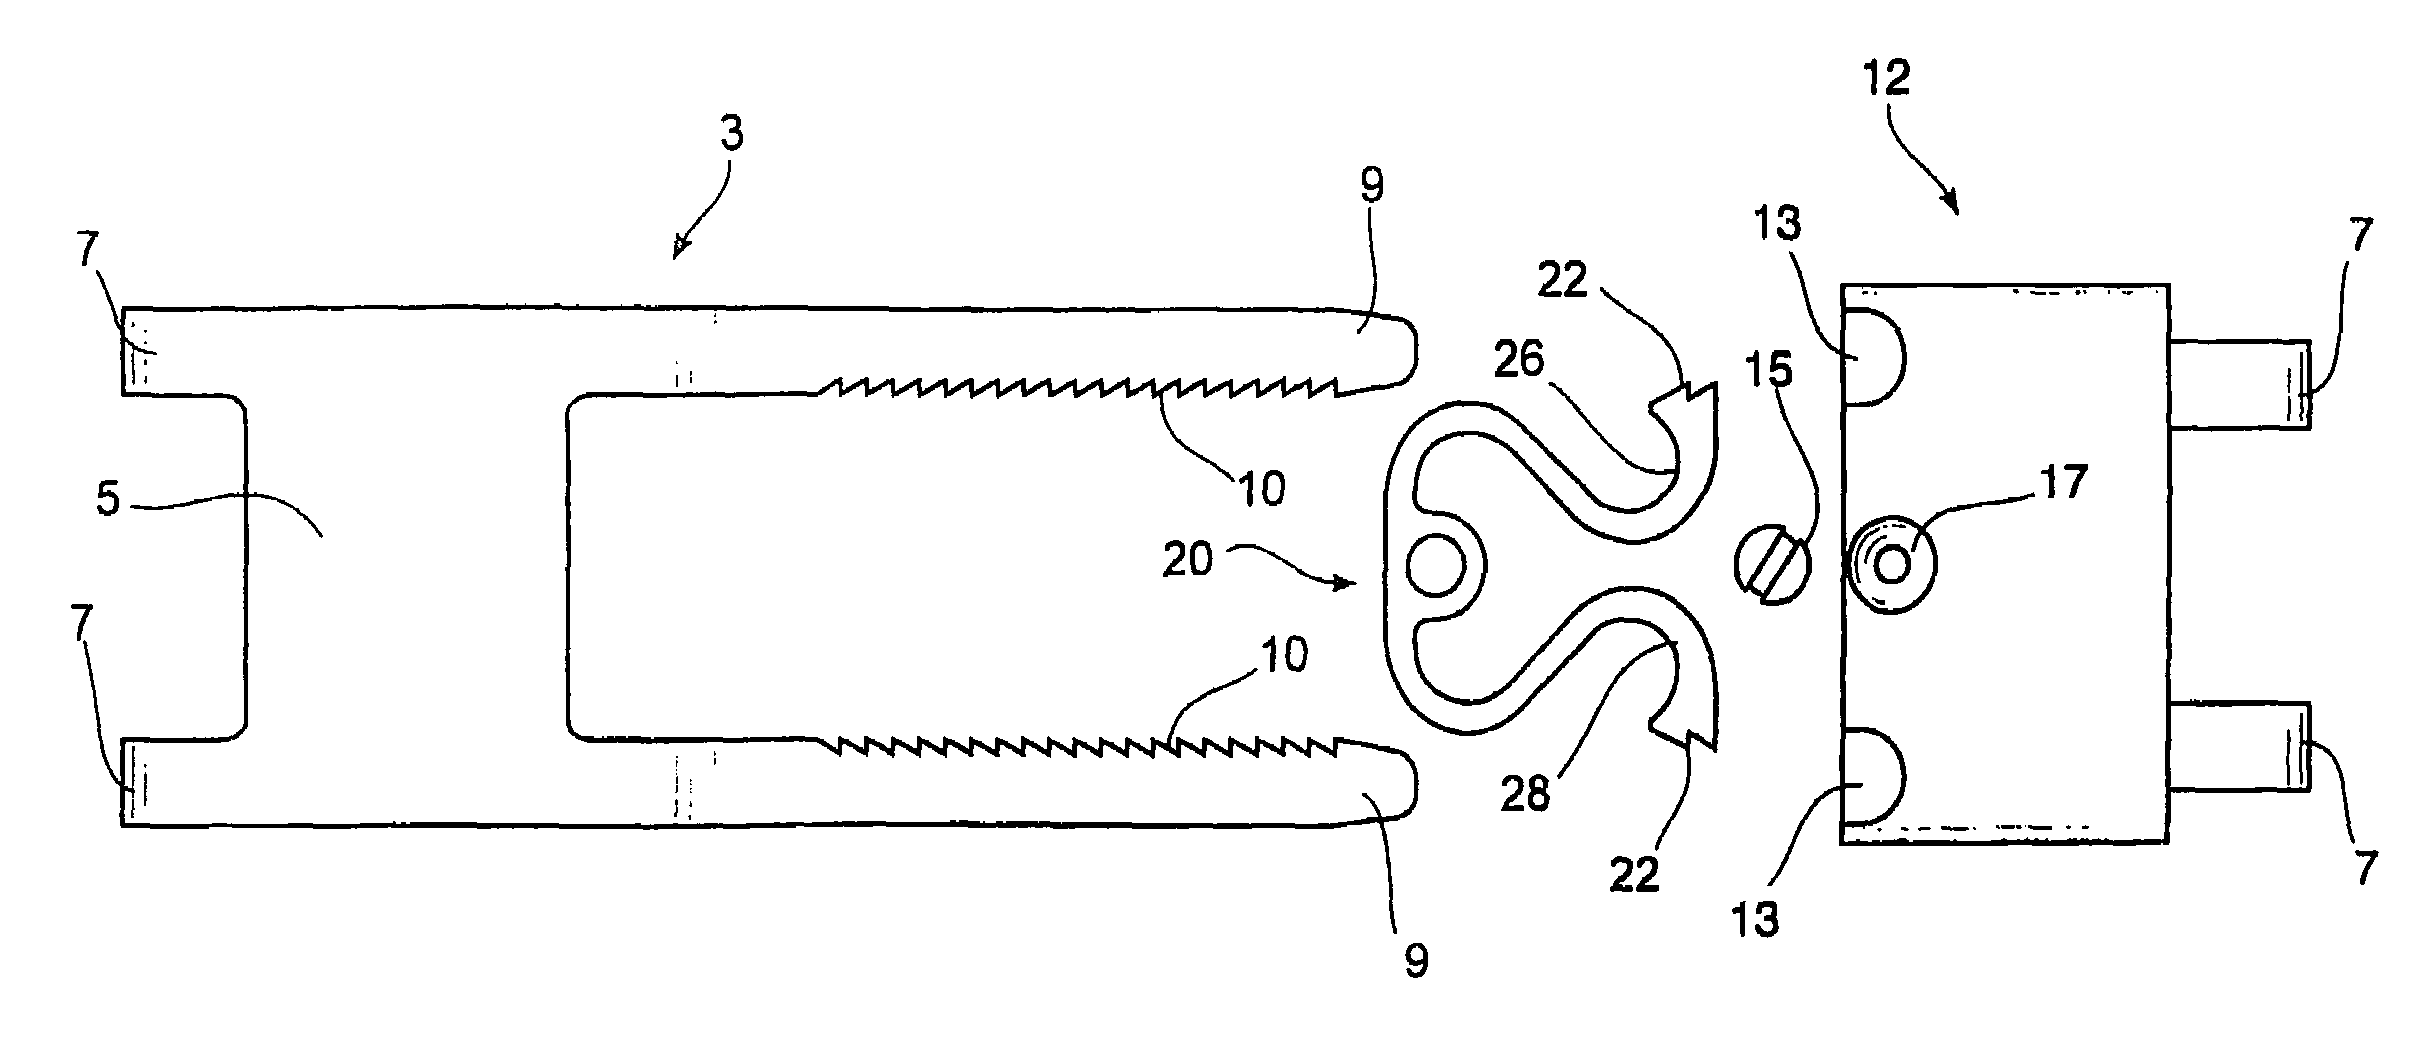 Method and apparatus for closing a severed sternum